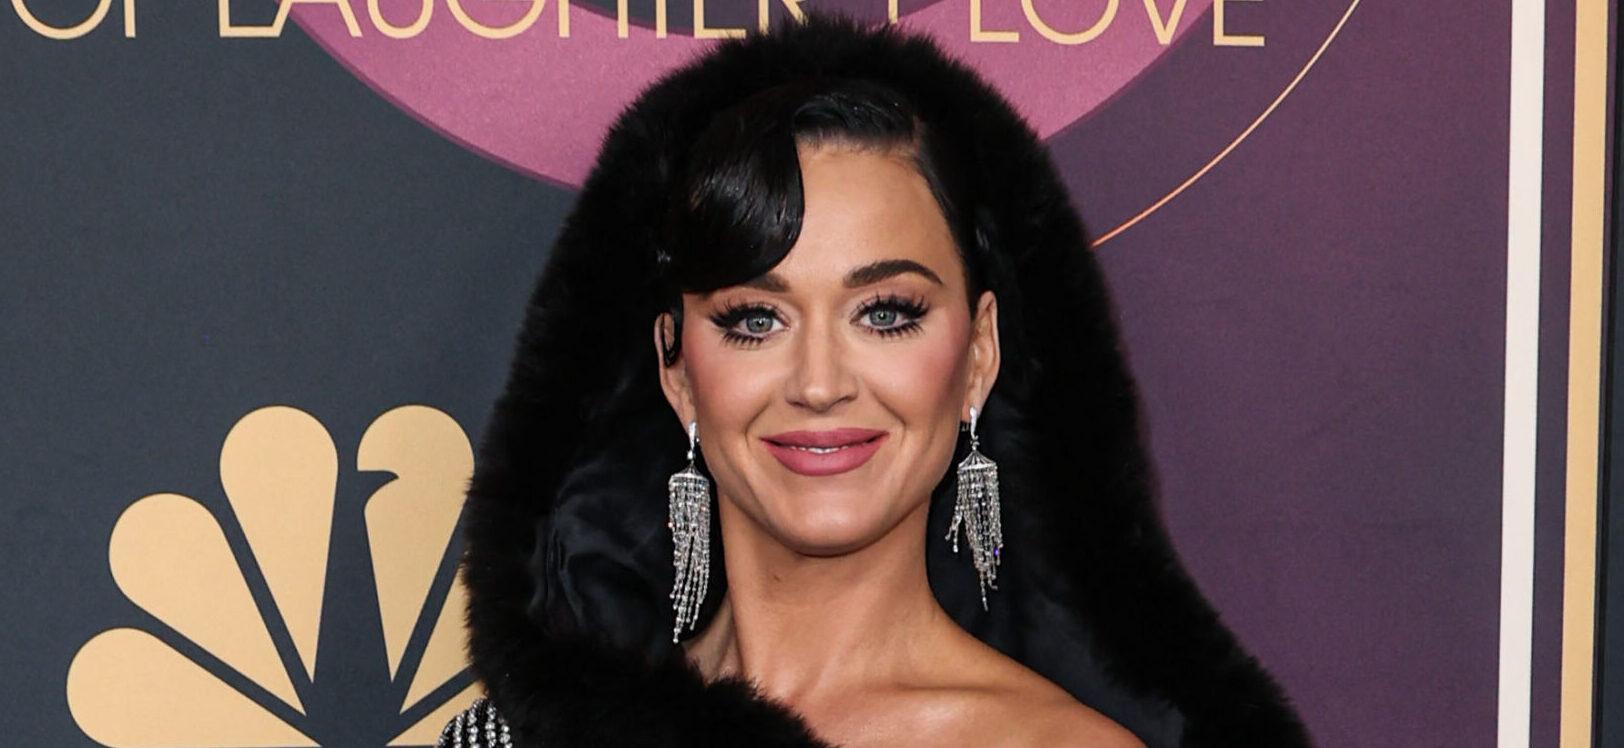 Katy Perry attends NBC's 'Carol Burnett: 90 Years Of Laughter + Love' Birthday Special